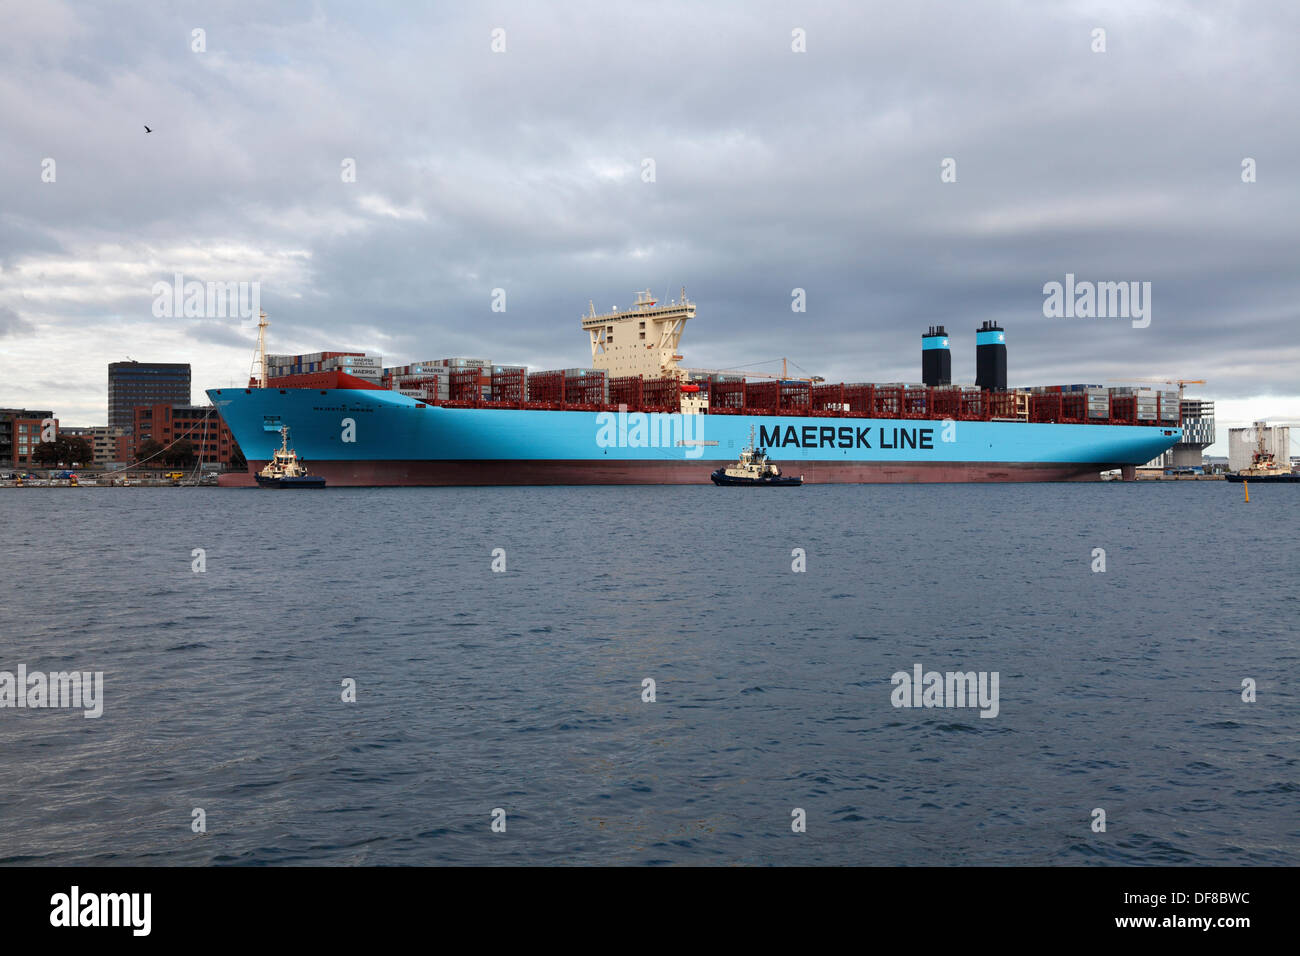 Copenhagen, Denmark. 30th Sep, 2013. The Majestic Maersk left the Langelinie quay in Copenhagen after one week's official naming ceremony and presentation to Maersk relations and the Danish public. Majestic Maersk, now heading for Gothenburg in Sweden to enter the container service between Europe and Asia, will probably never visit Copenhagen again as it is off-route and not suitable for this size of ship. By help of own propellers and four Svitzer tugs the ship was backed out of the harbour, as it is too shallow and small for a triple-E class ship to turn. Credit:  Niels Quist/Alamy Live News Stock Photo